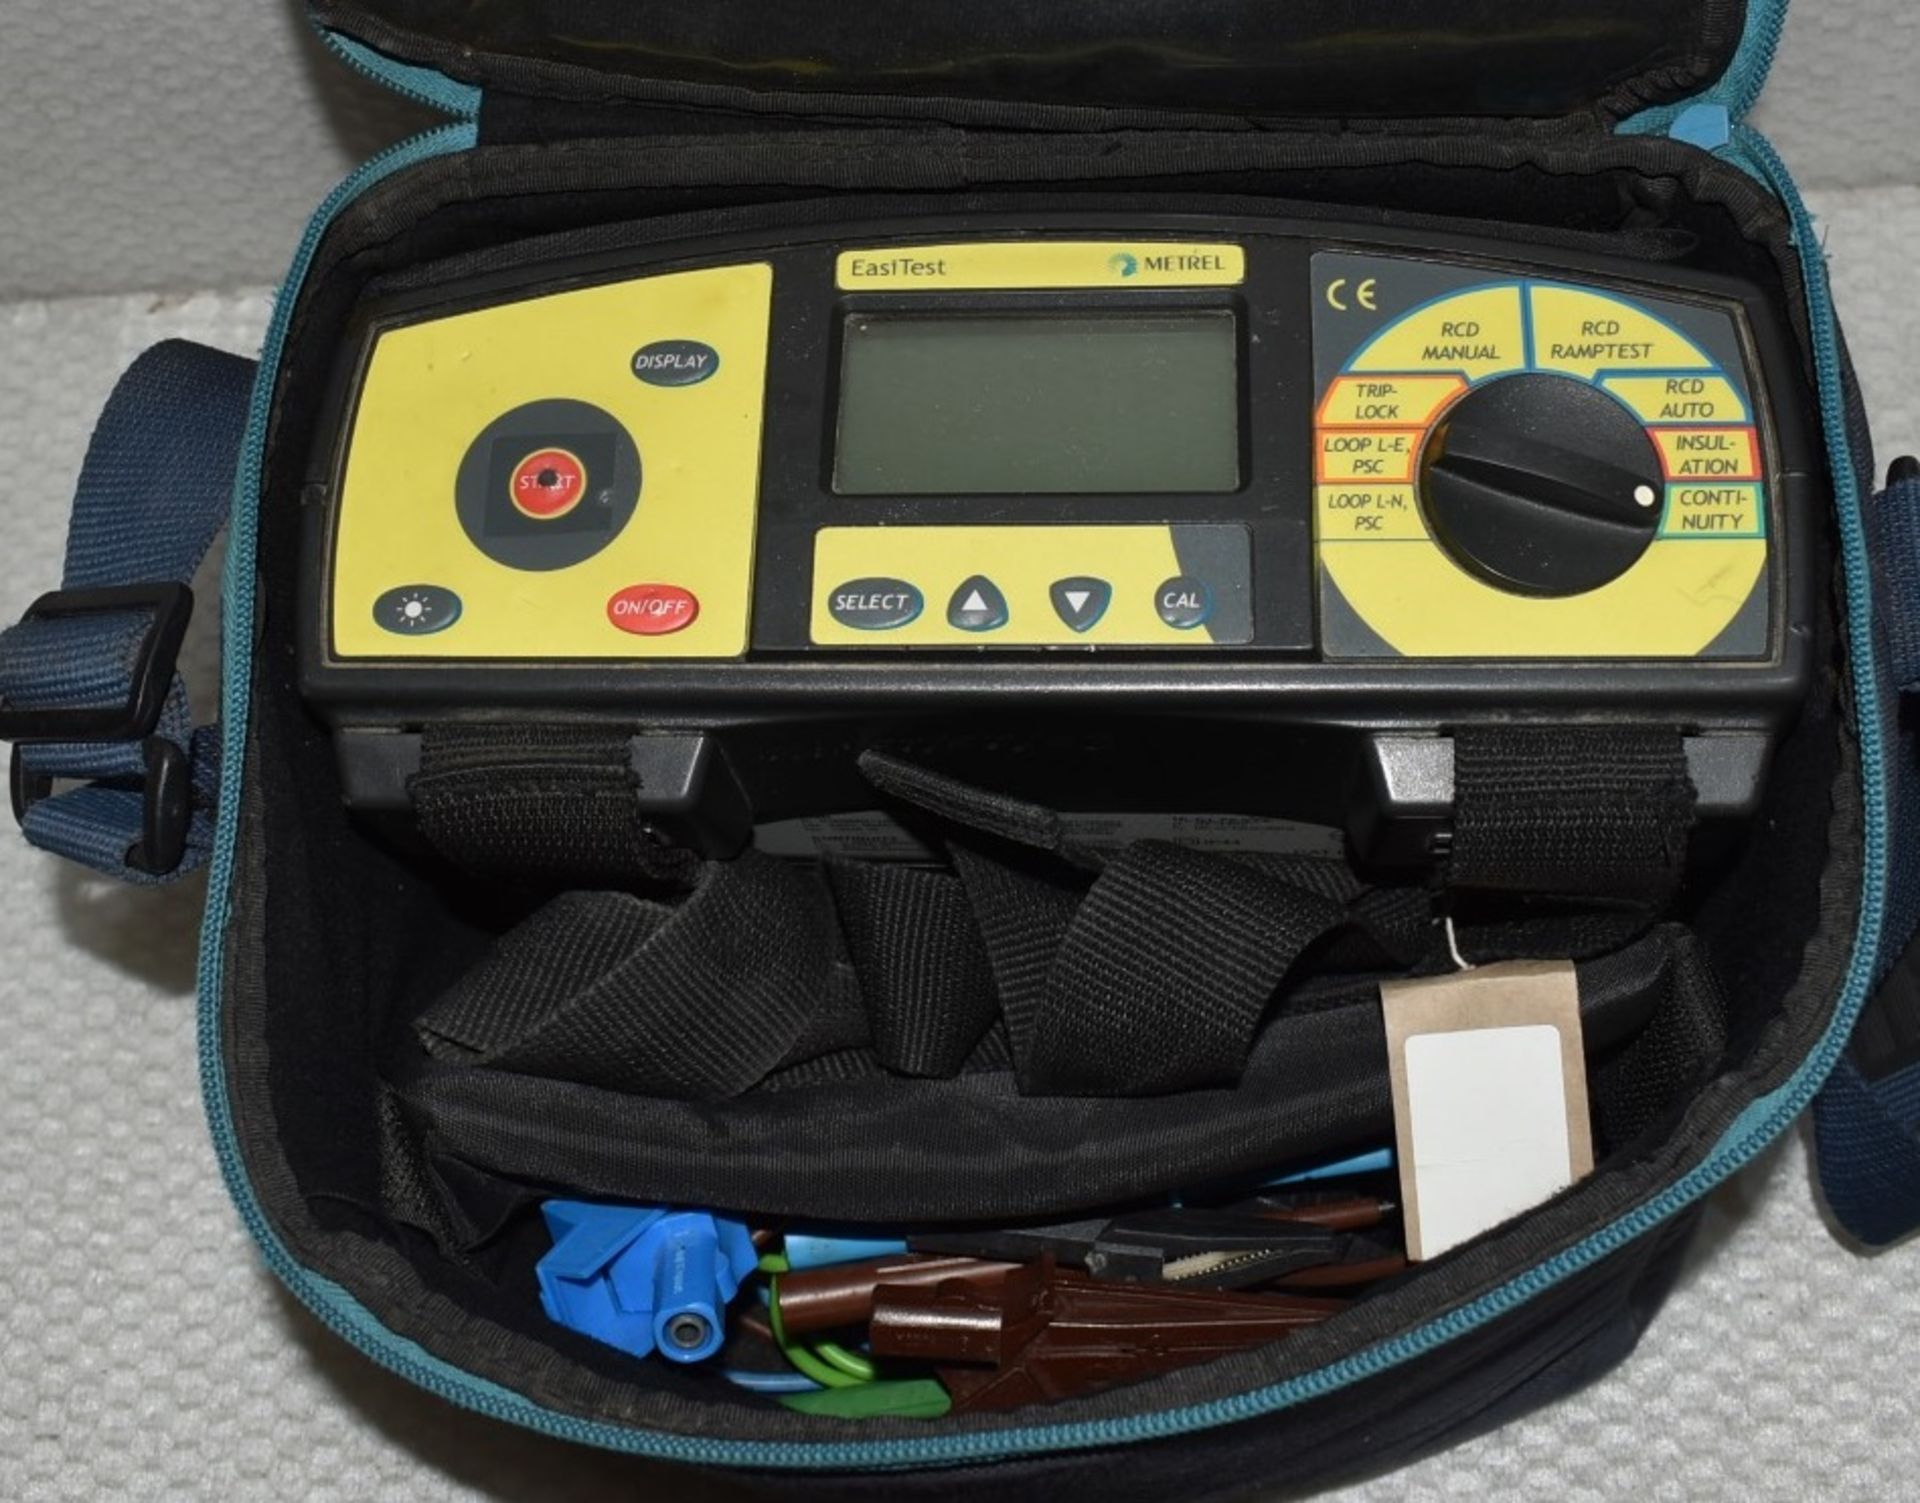 1 x METREL Easitest Multifunctional Portable Electrical Tester With Carry Case - Ref: DS7500 ALT - - Image 8 of 8